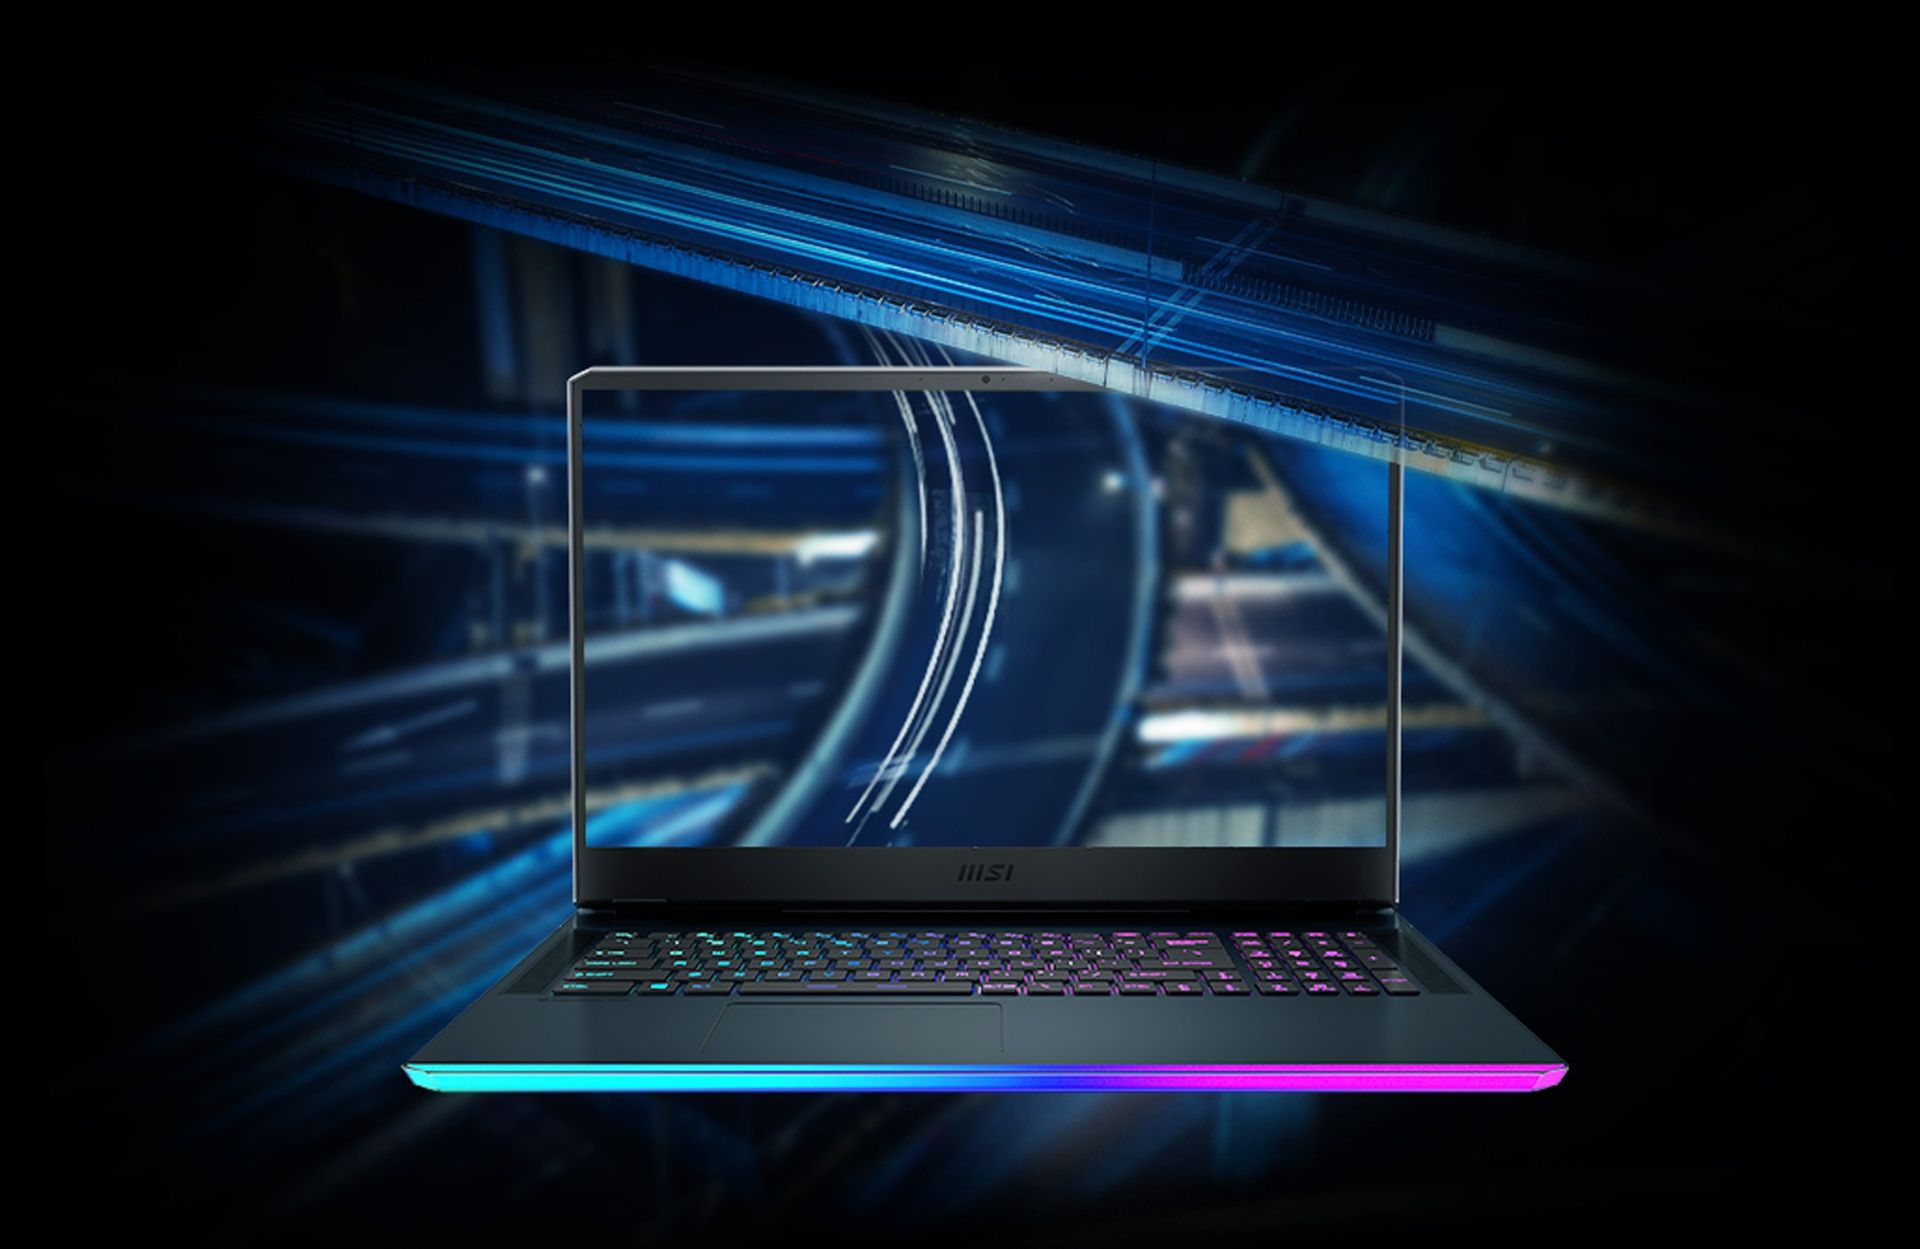 In this article, we are going to give you our MSI Raider GE76 12U review, including the specs, price, and all there is to know about this top-of-the-line gaming laptop.